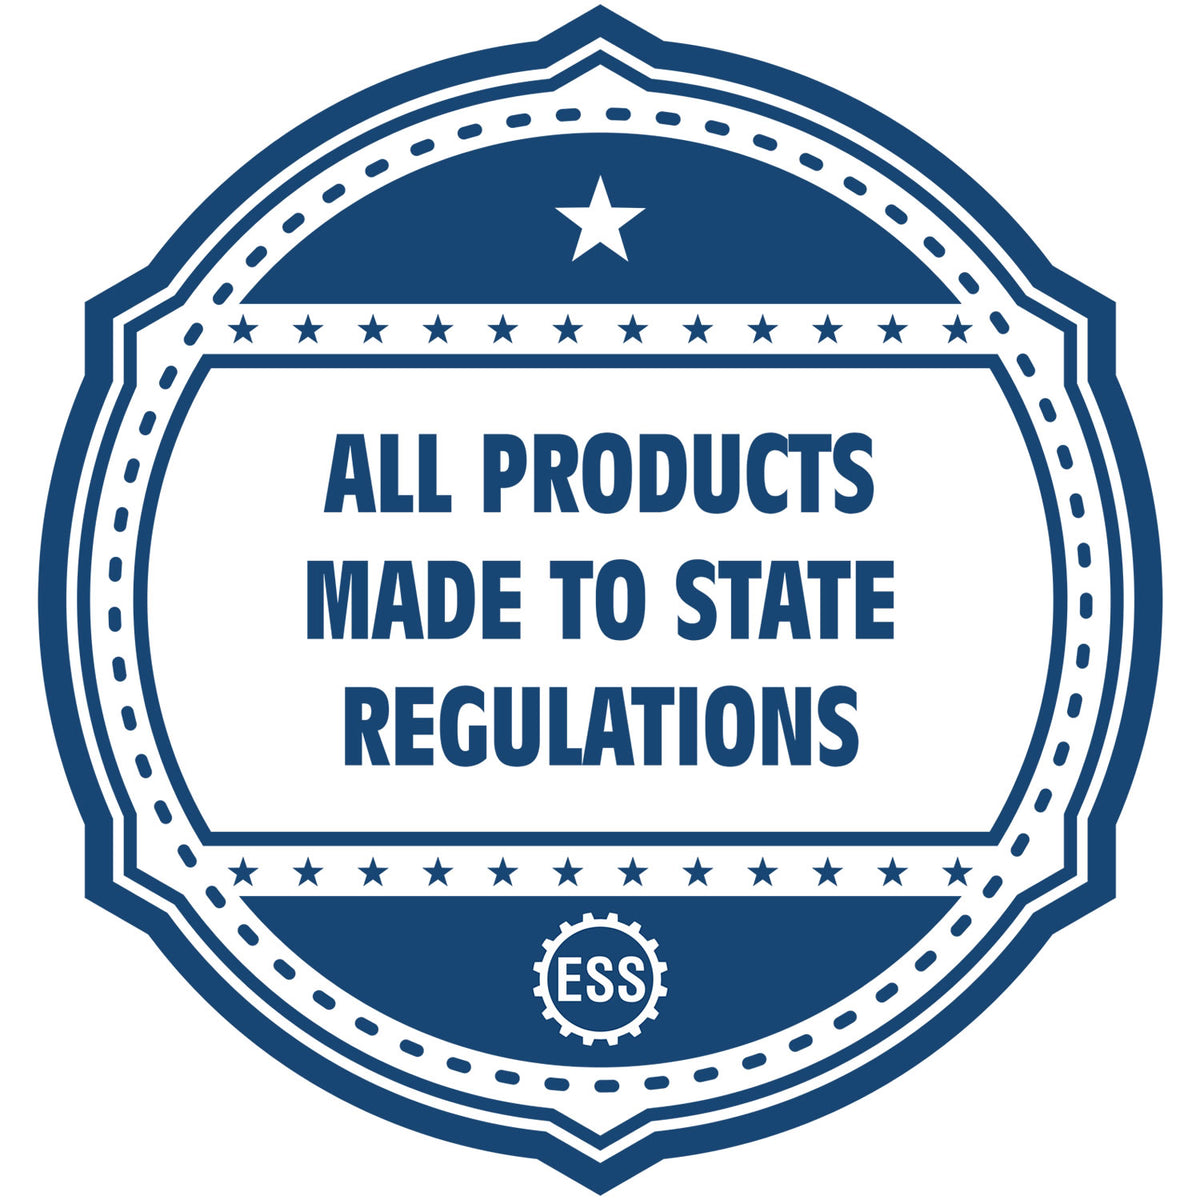 An icon or badge element for the Ohio Engineer Desk Seal showing that this product is made in compliance with state regulations.